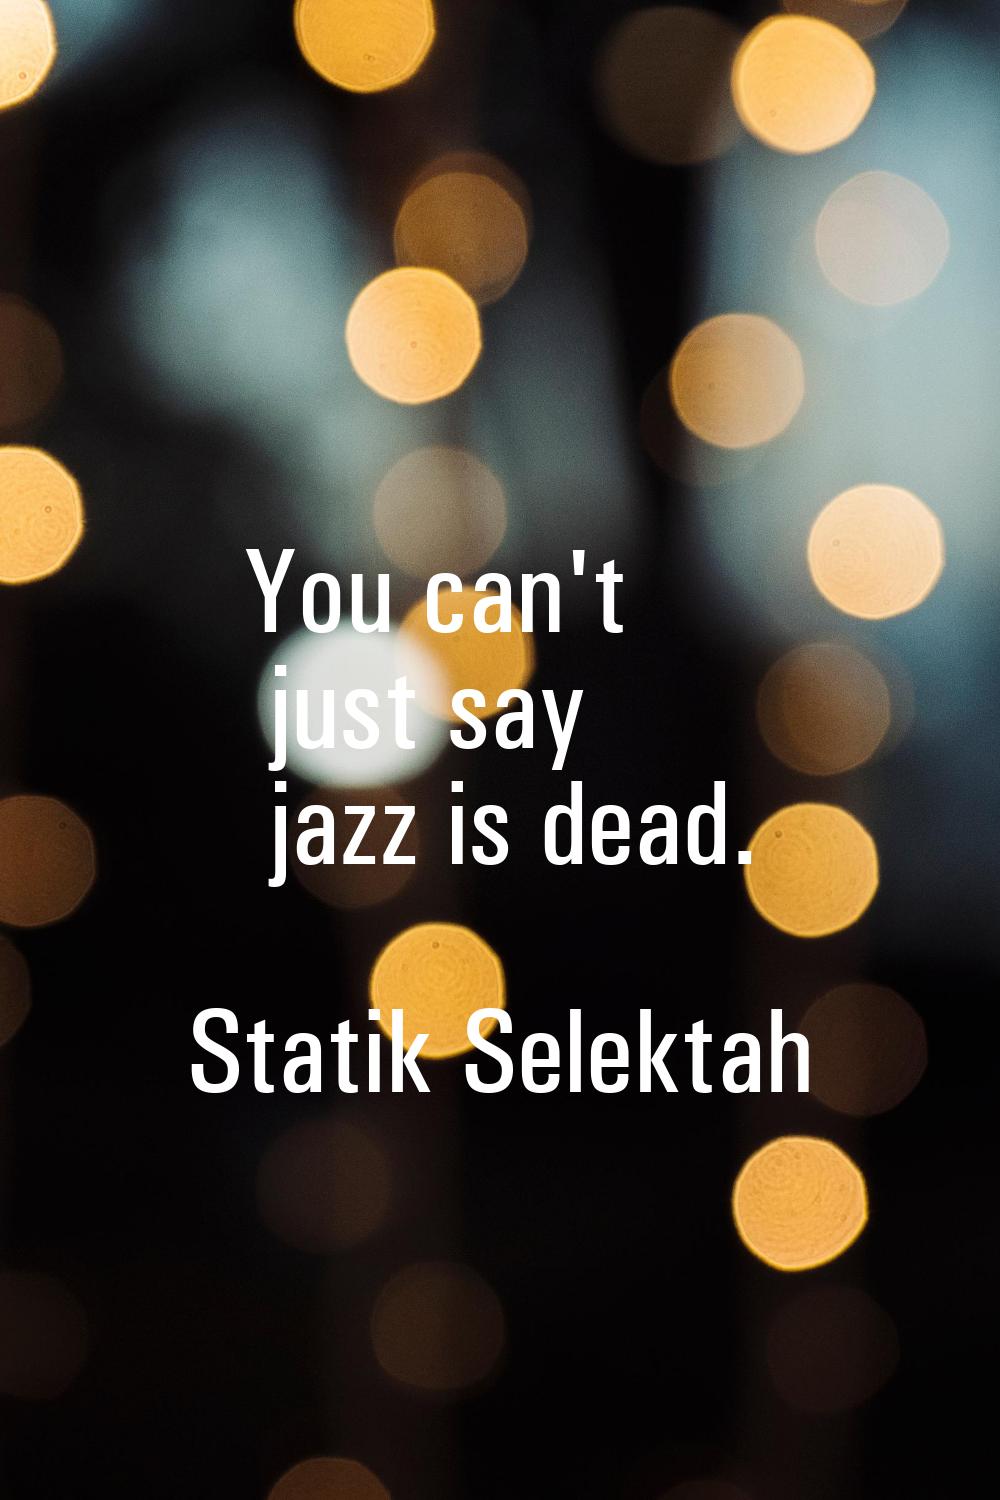 You can't just say jazz is dead.